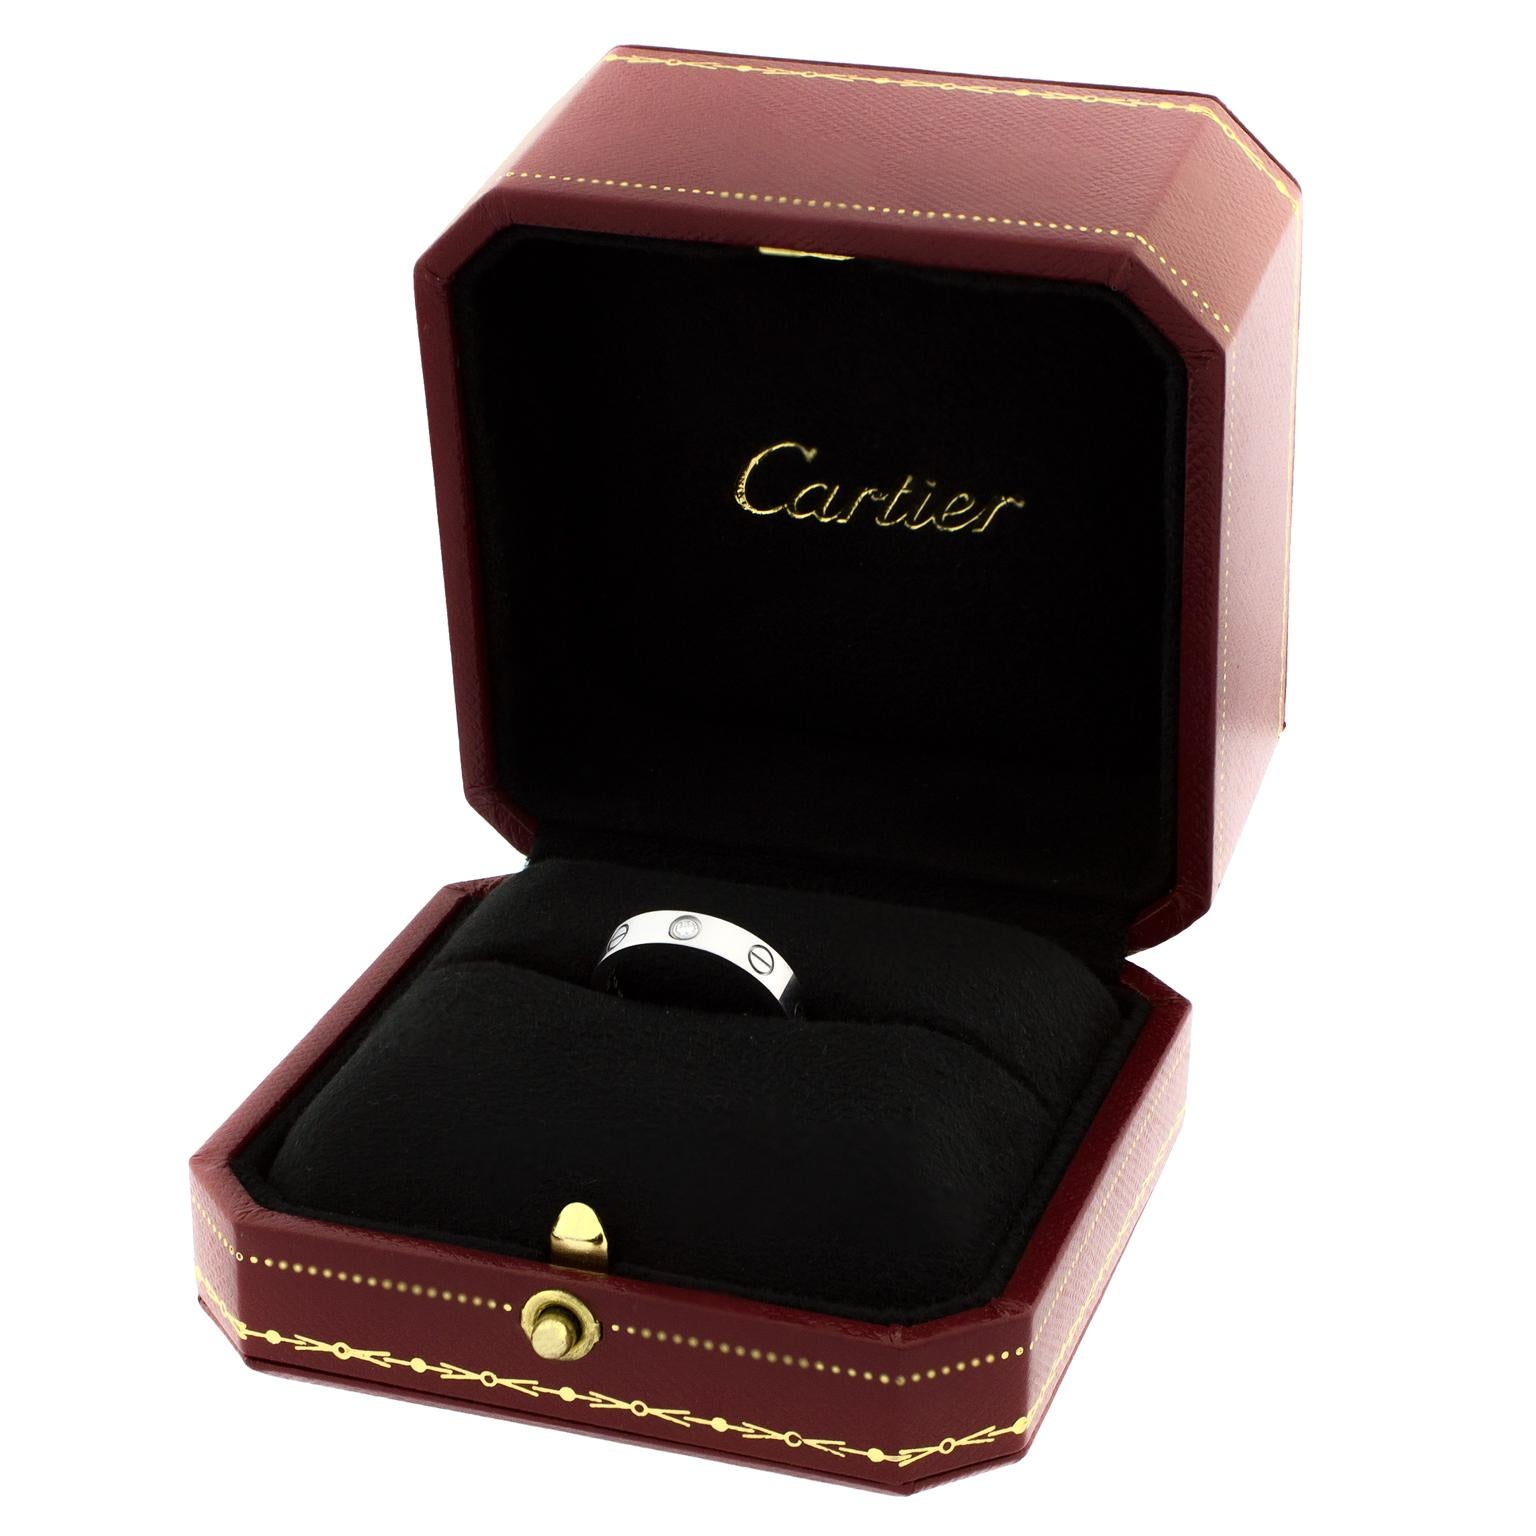 Cartier ring from the Love collection, in white gold and set with a 0.02 carats round brilliant cut diamond.
Ring size 
US 5 1/8
France 50
Swiss 10
